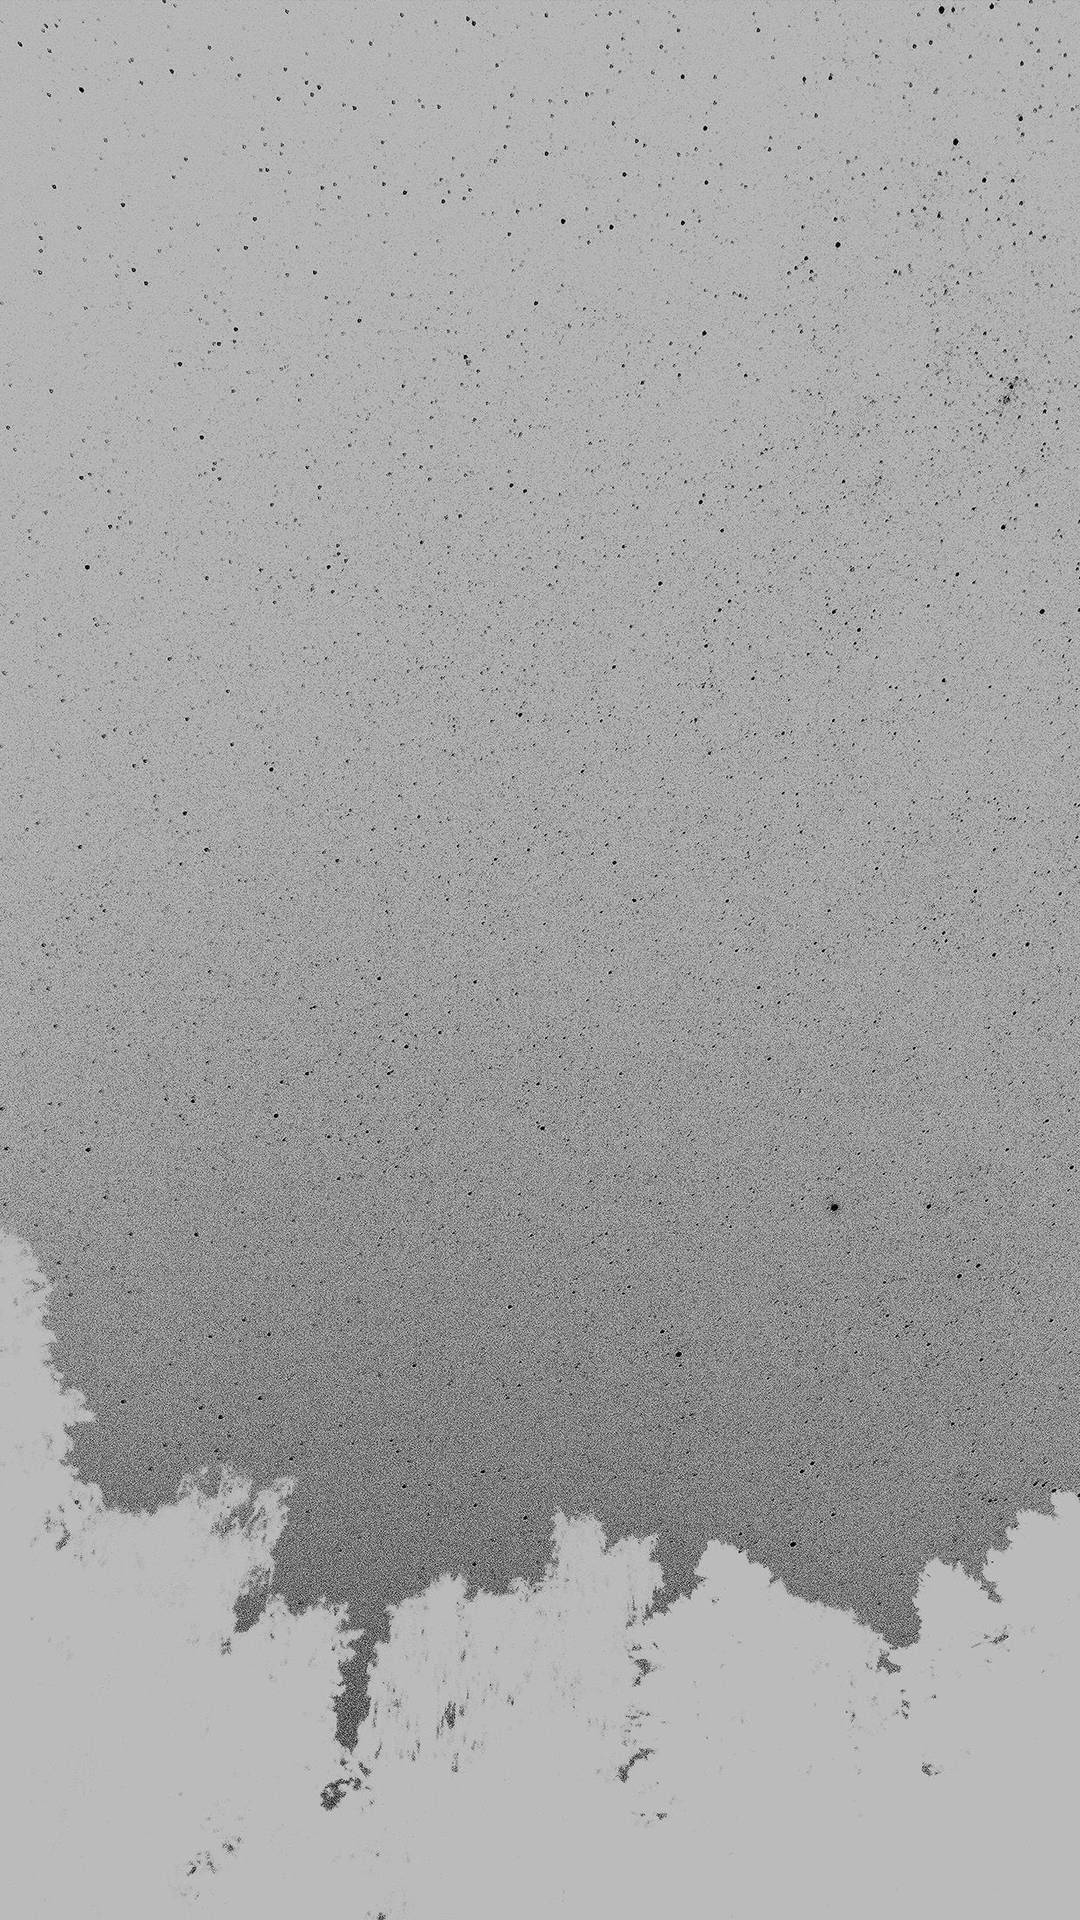 Grey Iphone Spilled Paint On Wall Background